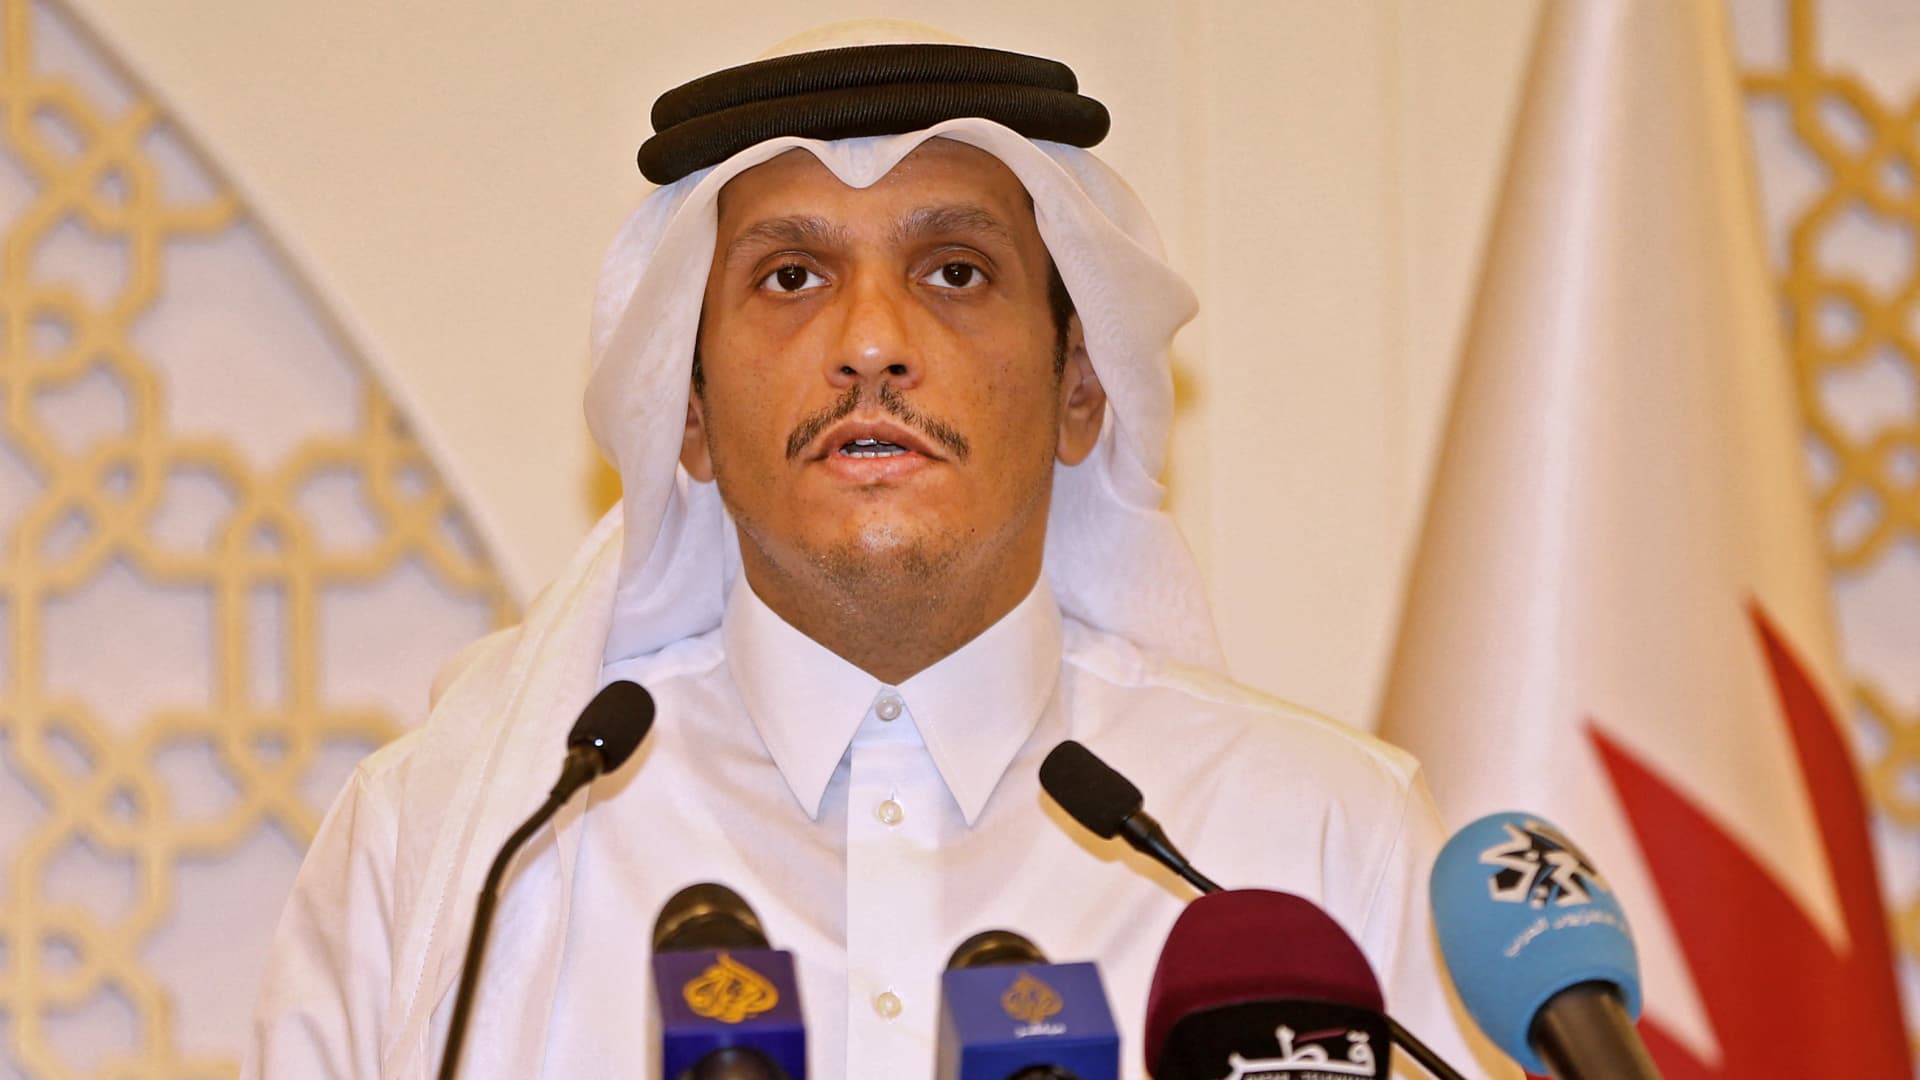 Qatar does not advocate ‘forgive and forget’ for Russia, foreign minister says after colleague’s controversial remarks